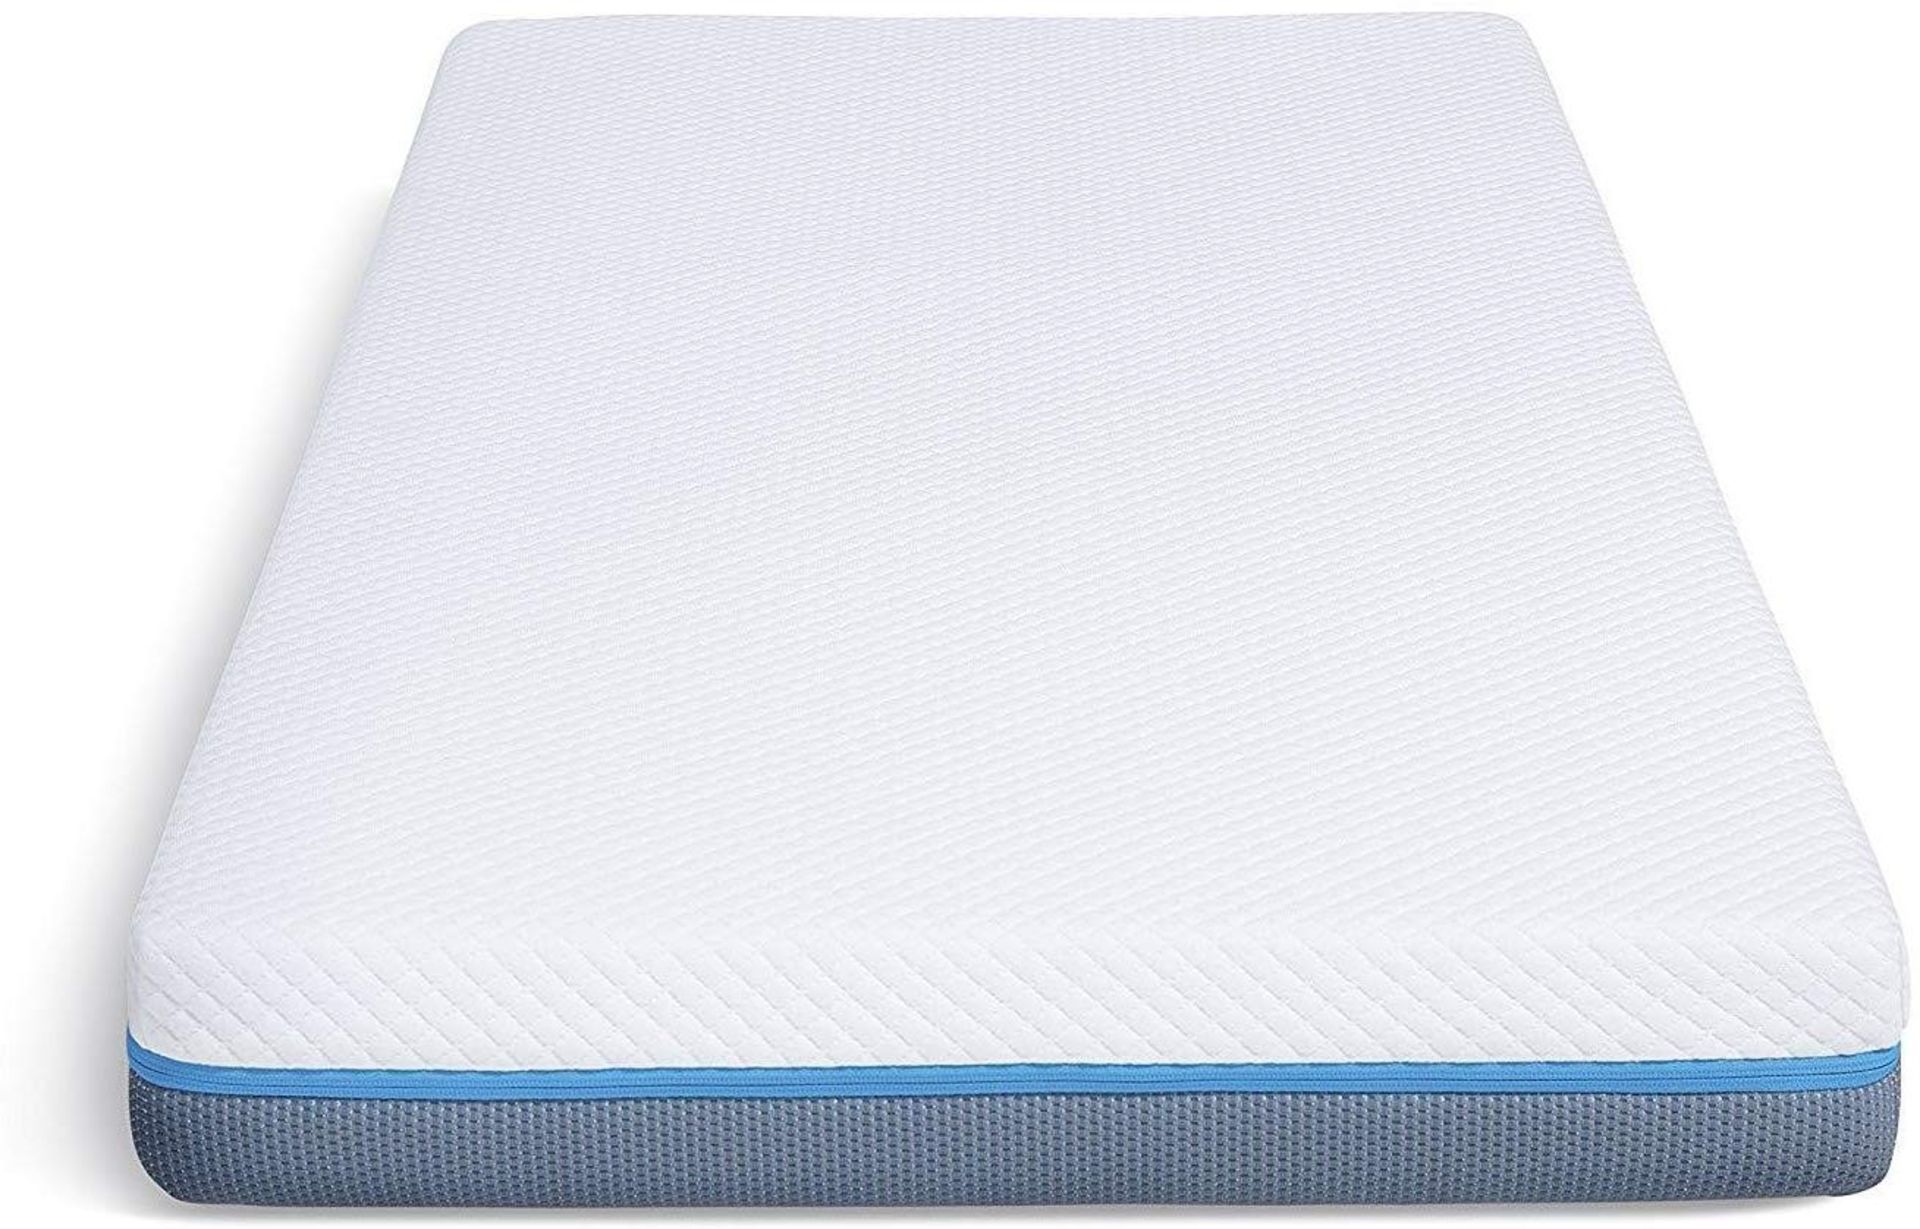 Brand New Boxed Double 4.6ft Simba Style Memory Foam Mattress. Knitted Fabric Zip On Cover In Modern